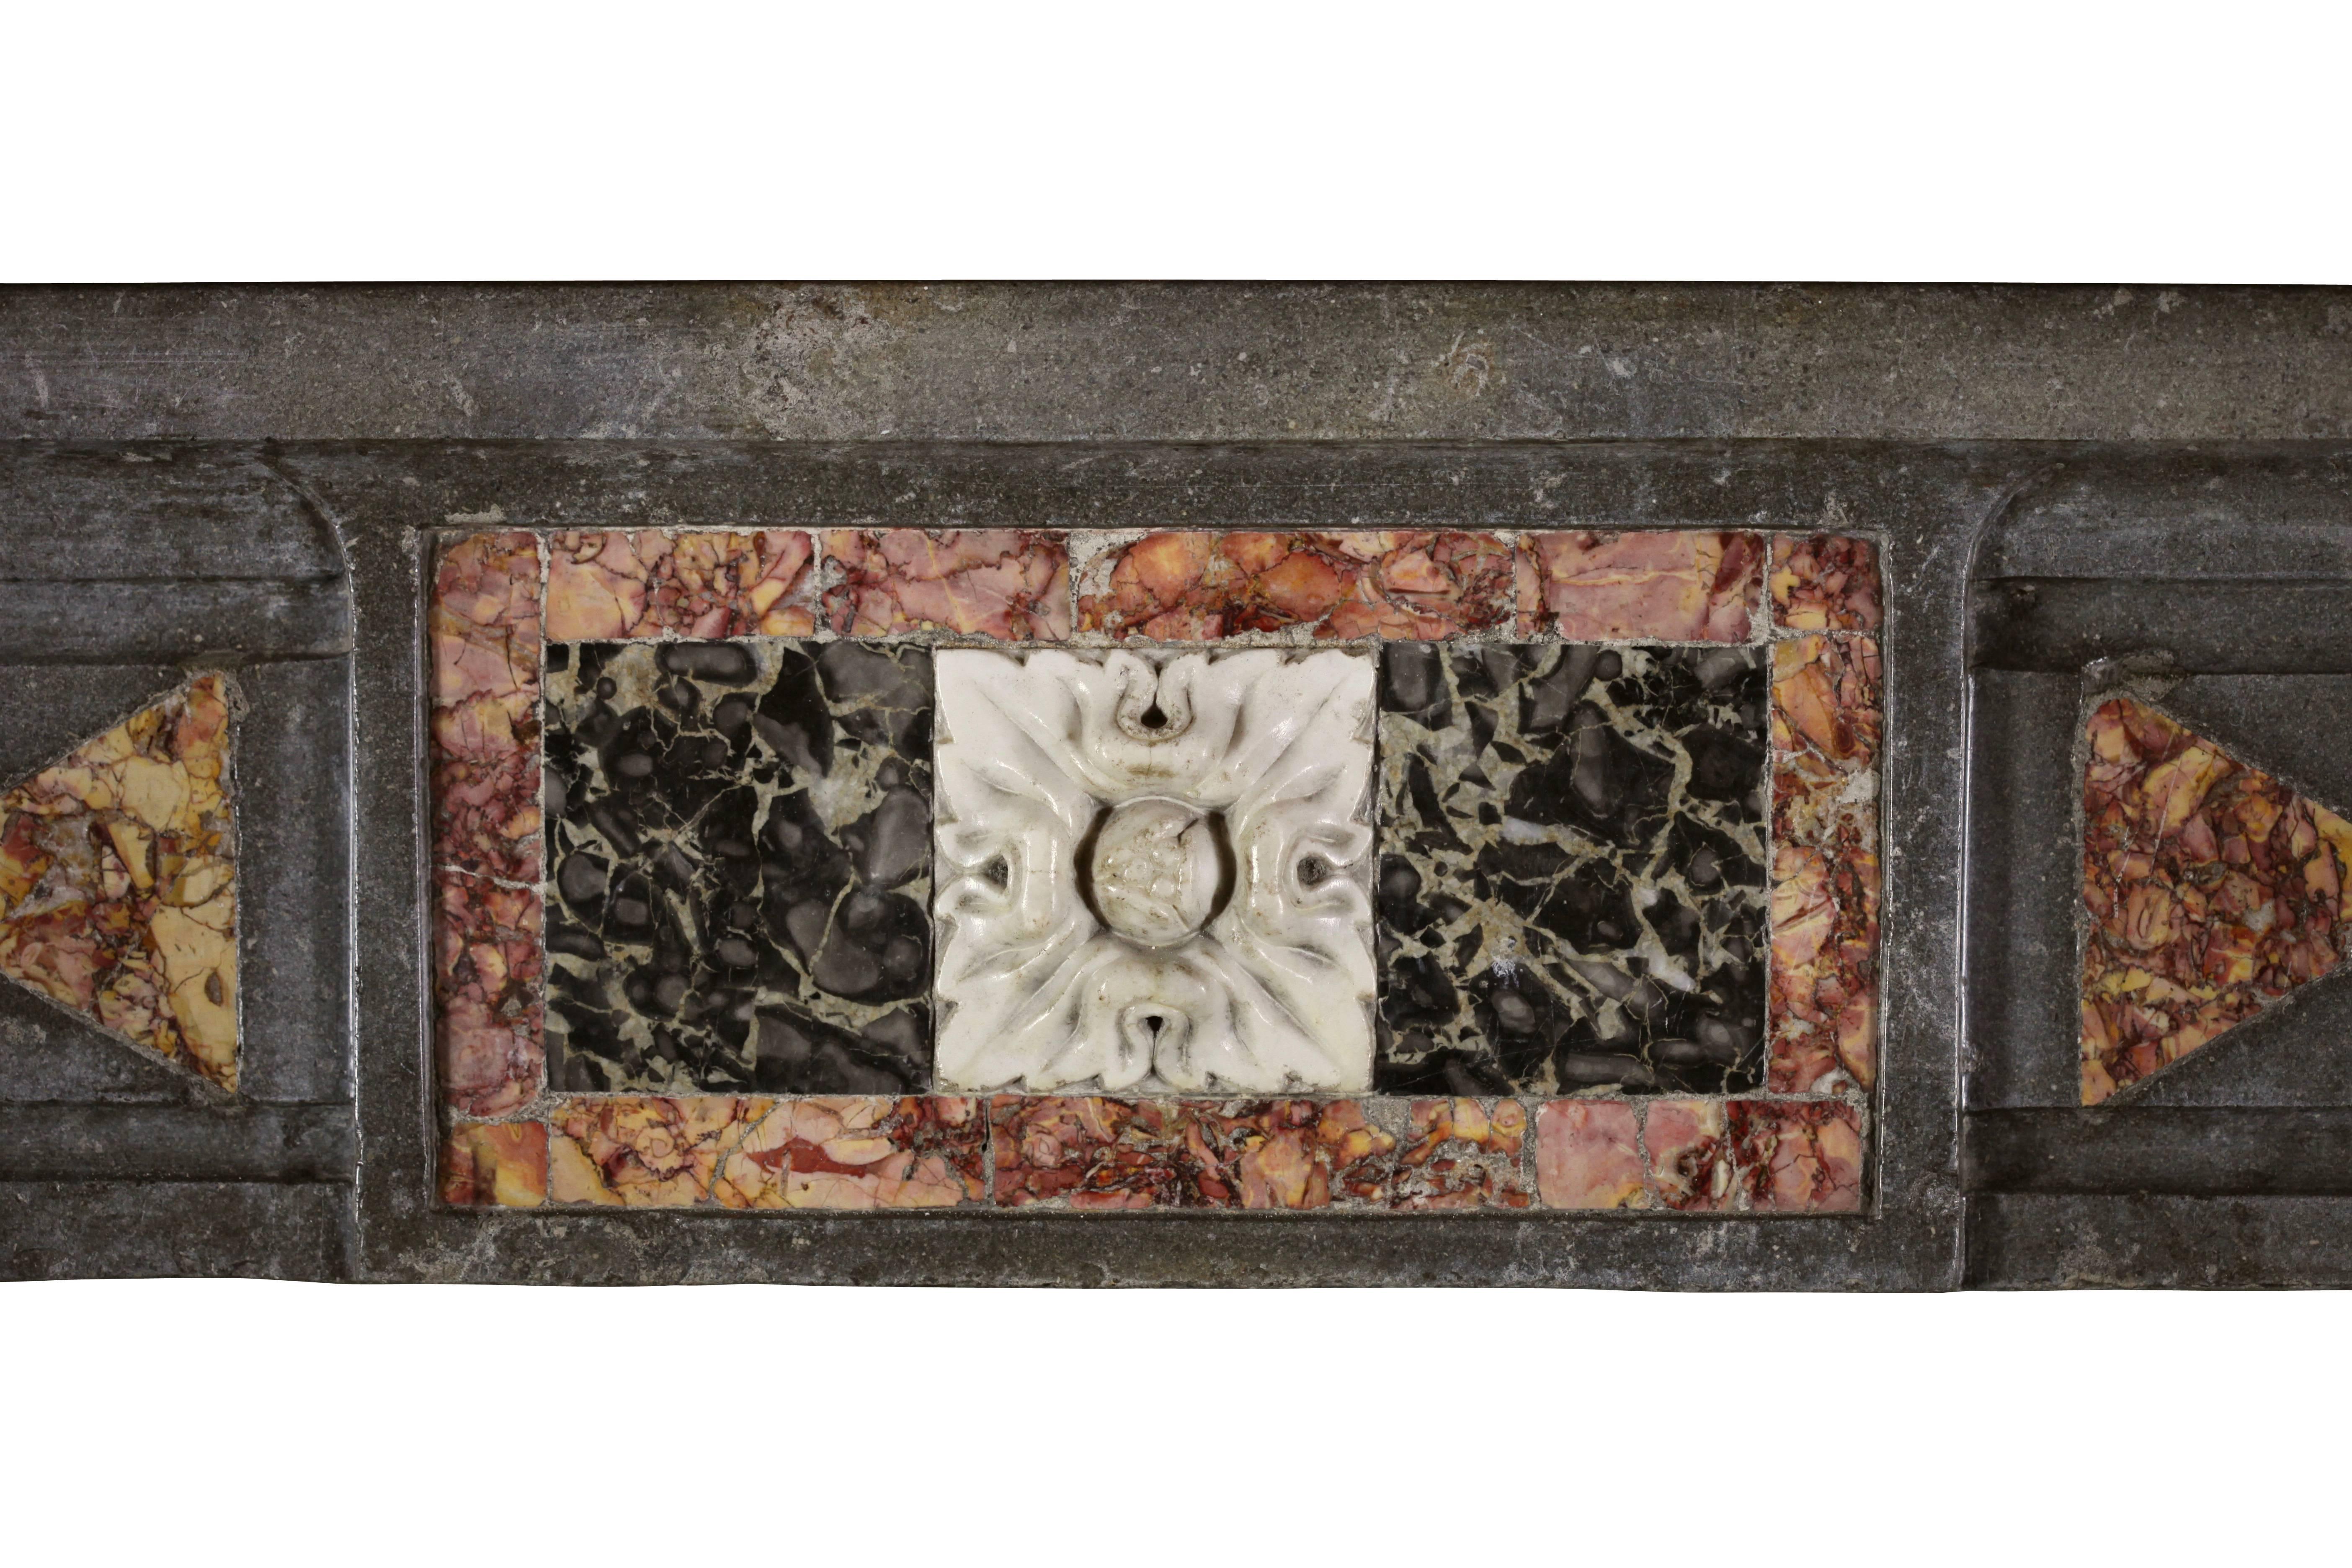 One of a kind Italian antique fireplace surround with statuary and Brocatelle marble inlay. This is a statement piece! Great for a country look or rustic chique like one would find in Venice.
Measures: 
170 cm EW 66.93